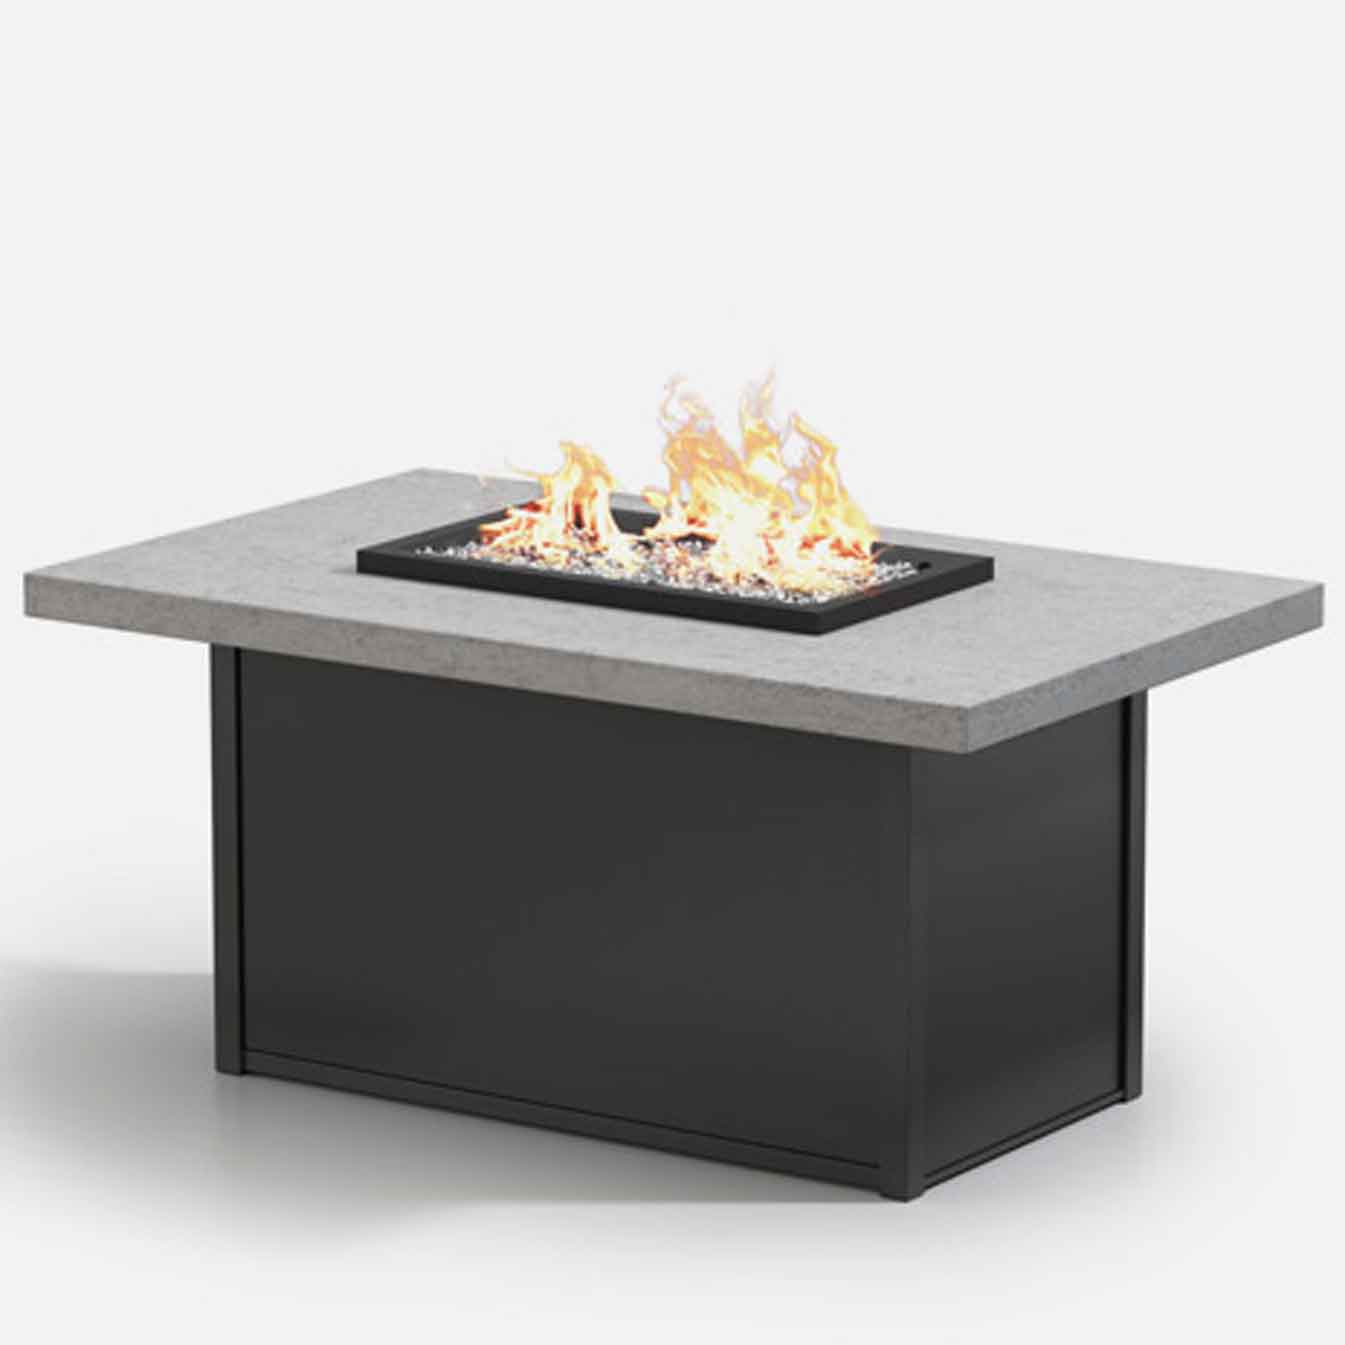 Aurora Rectangle Chat Fire Pit